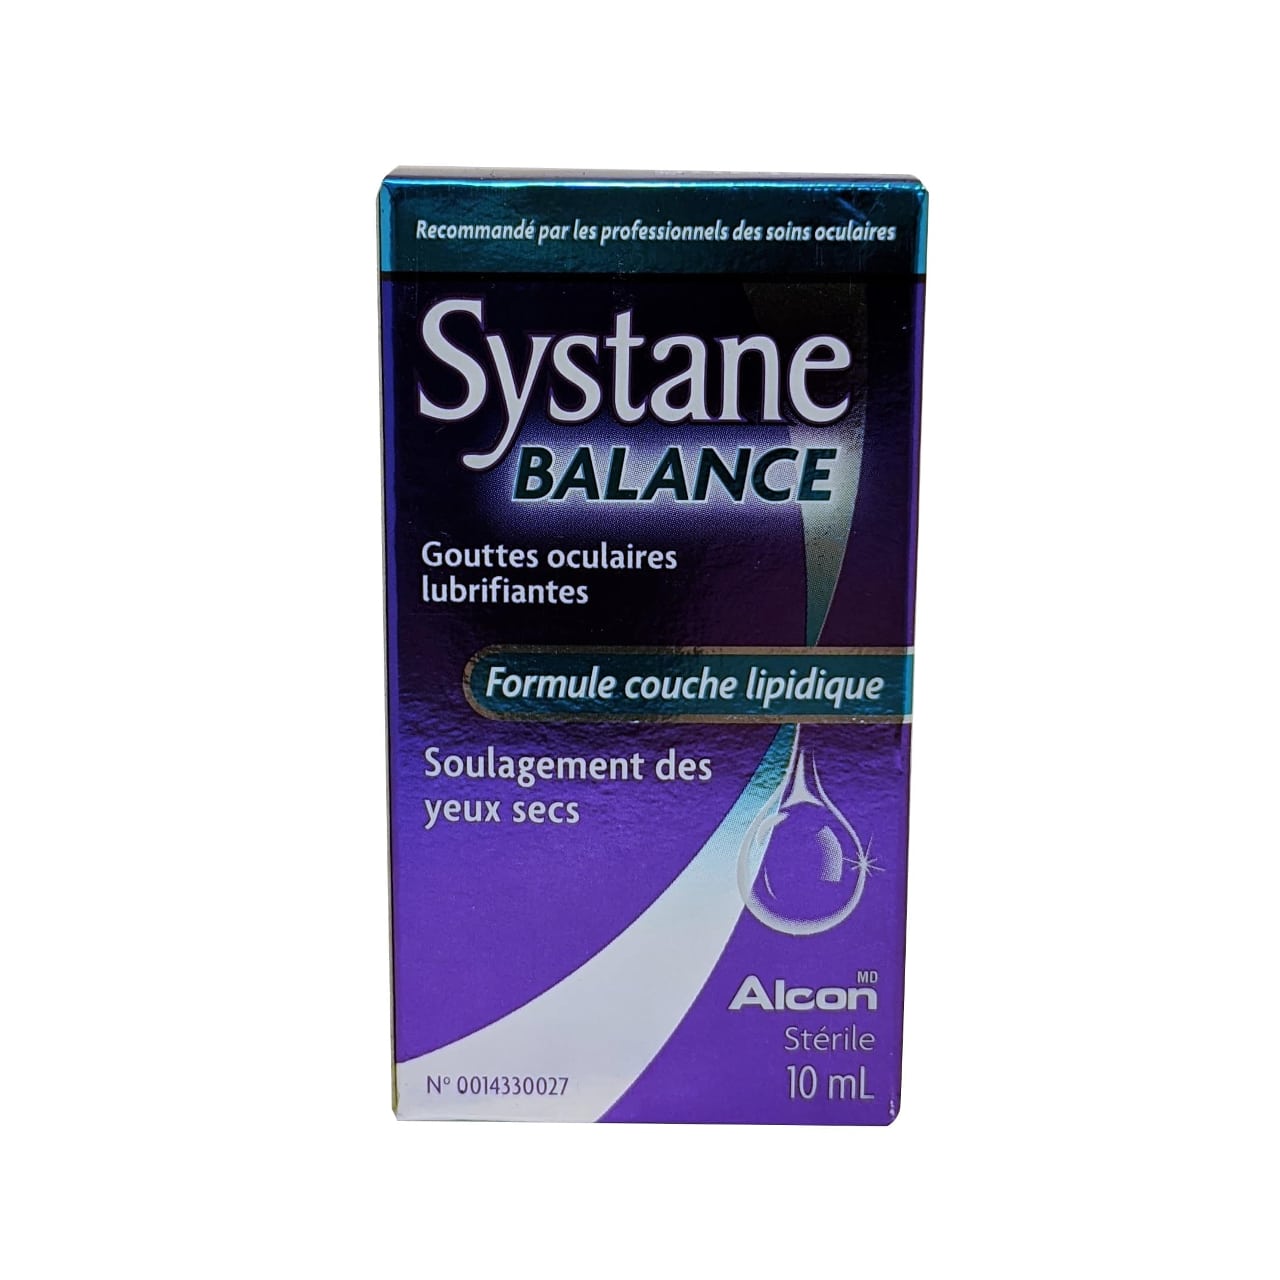 French product label for Alcon Systane Balance Lipid Layer Formula Lubricant Eye Drops